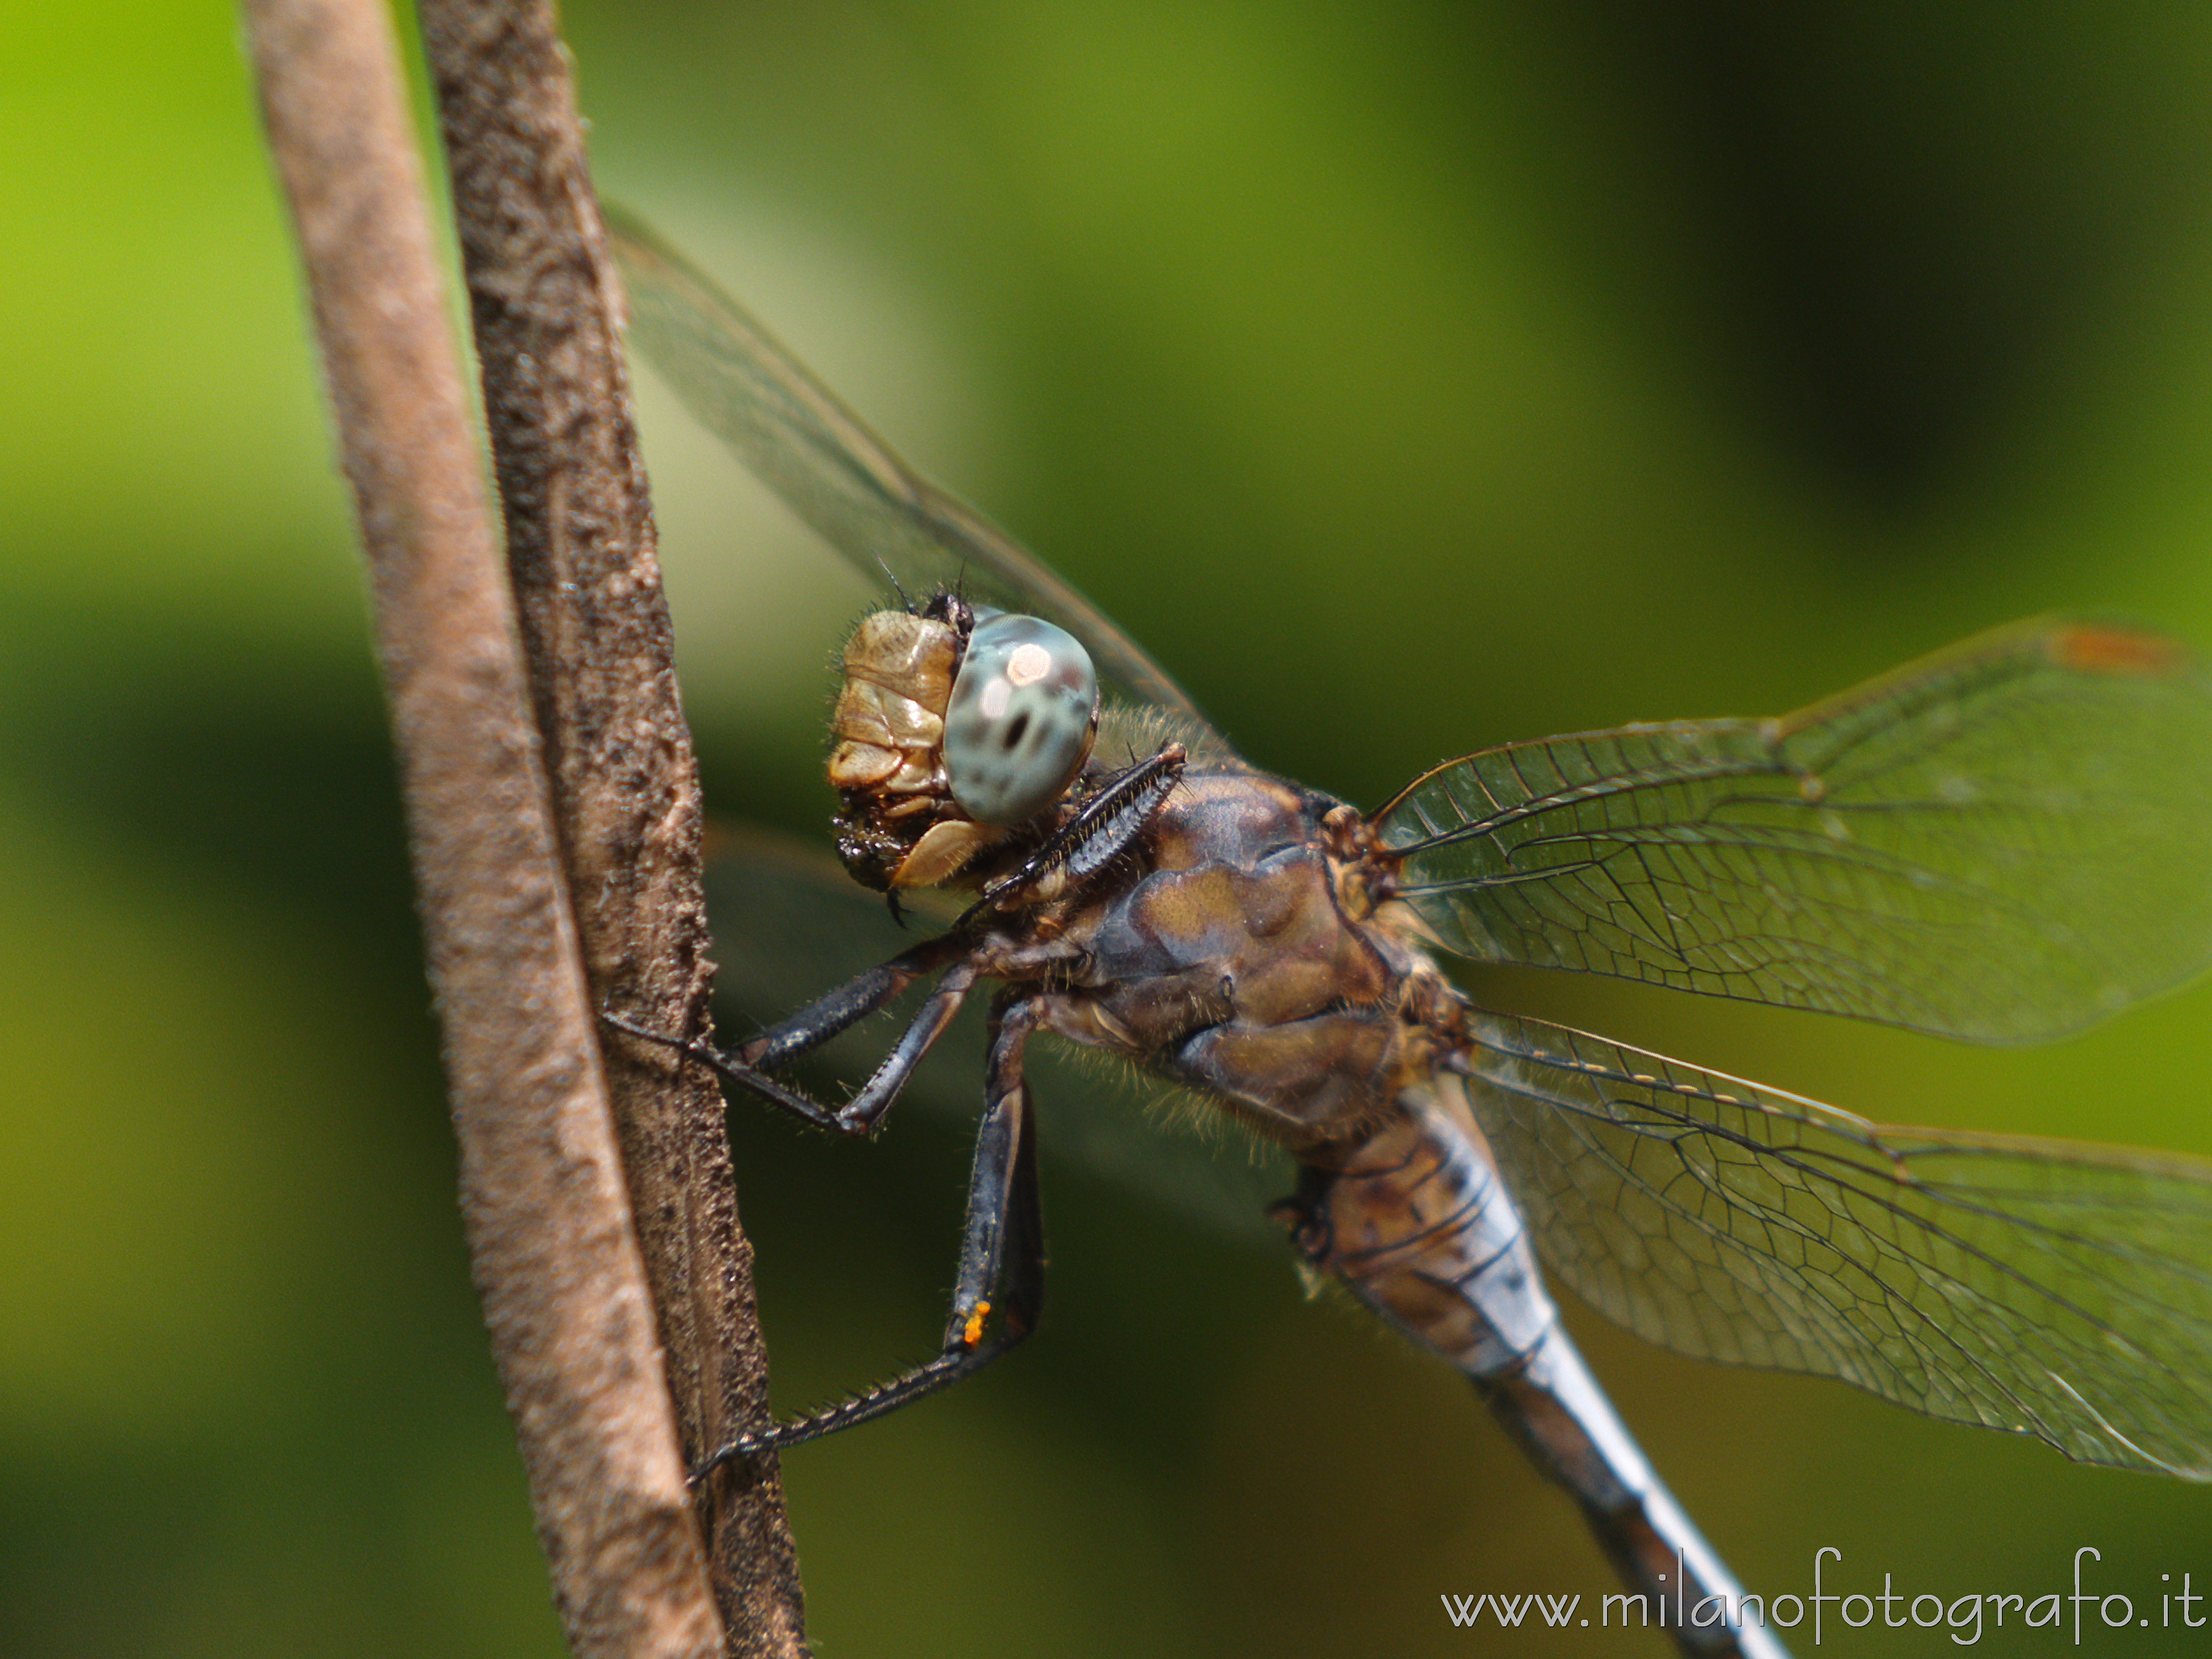 Cadrezzate (Varese, Italy): Most probably male Orthetrum coerulescens from the side - Cadrezzate (Varese, Italy)